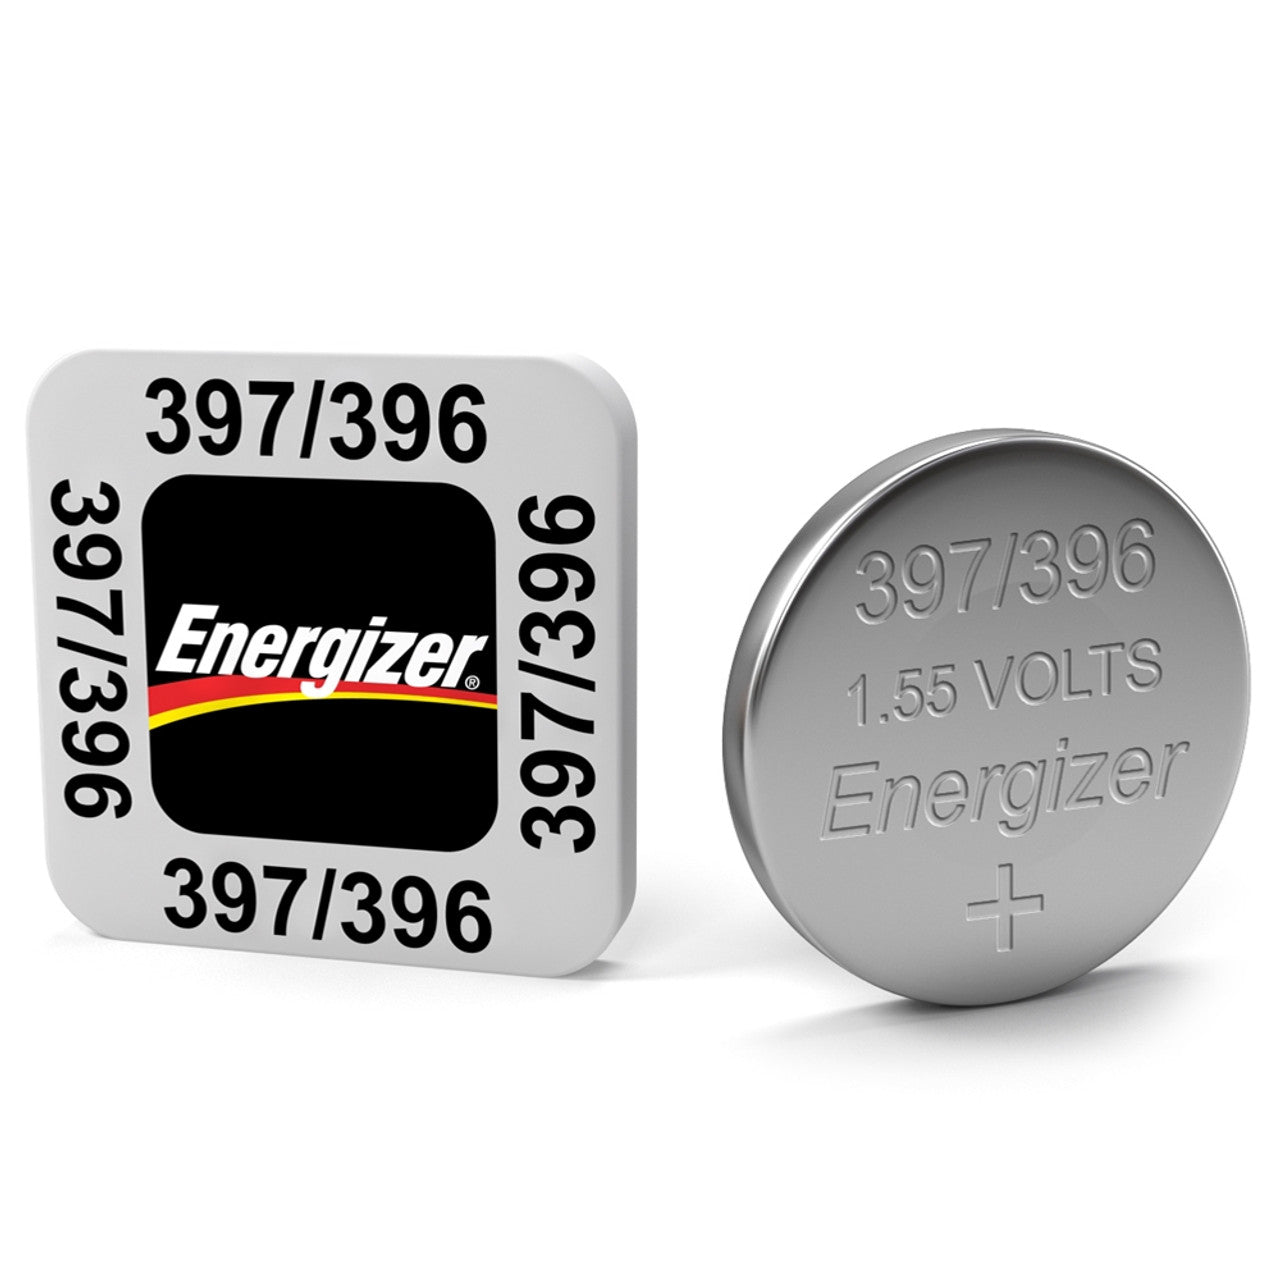 Energizer 397/396 Silberoxid-Knopfzelle, 10er-Pack